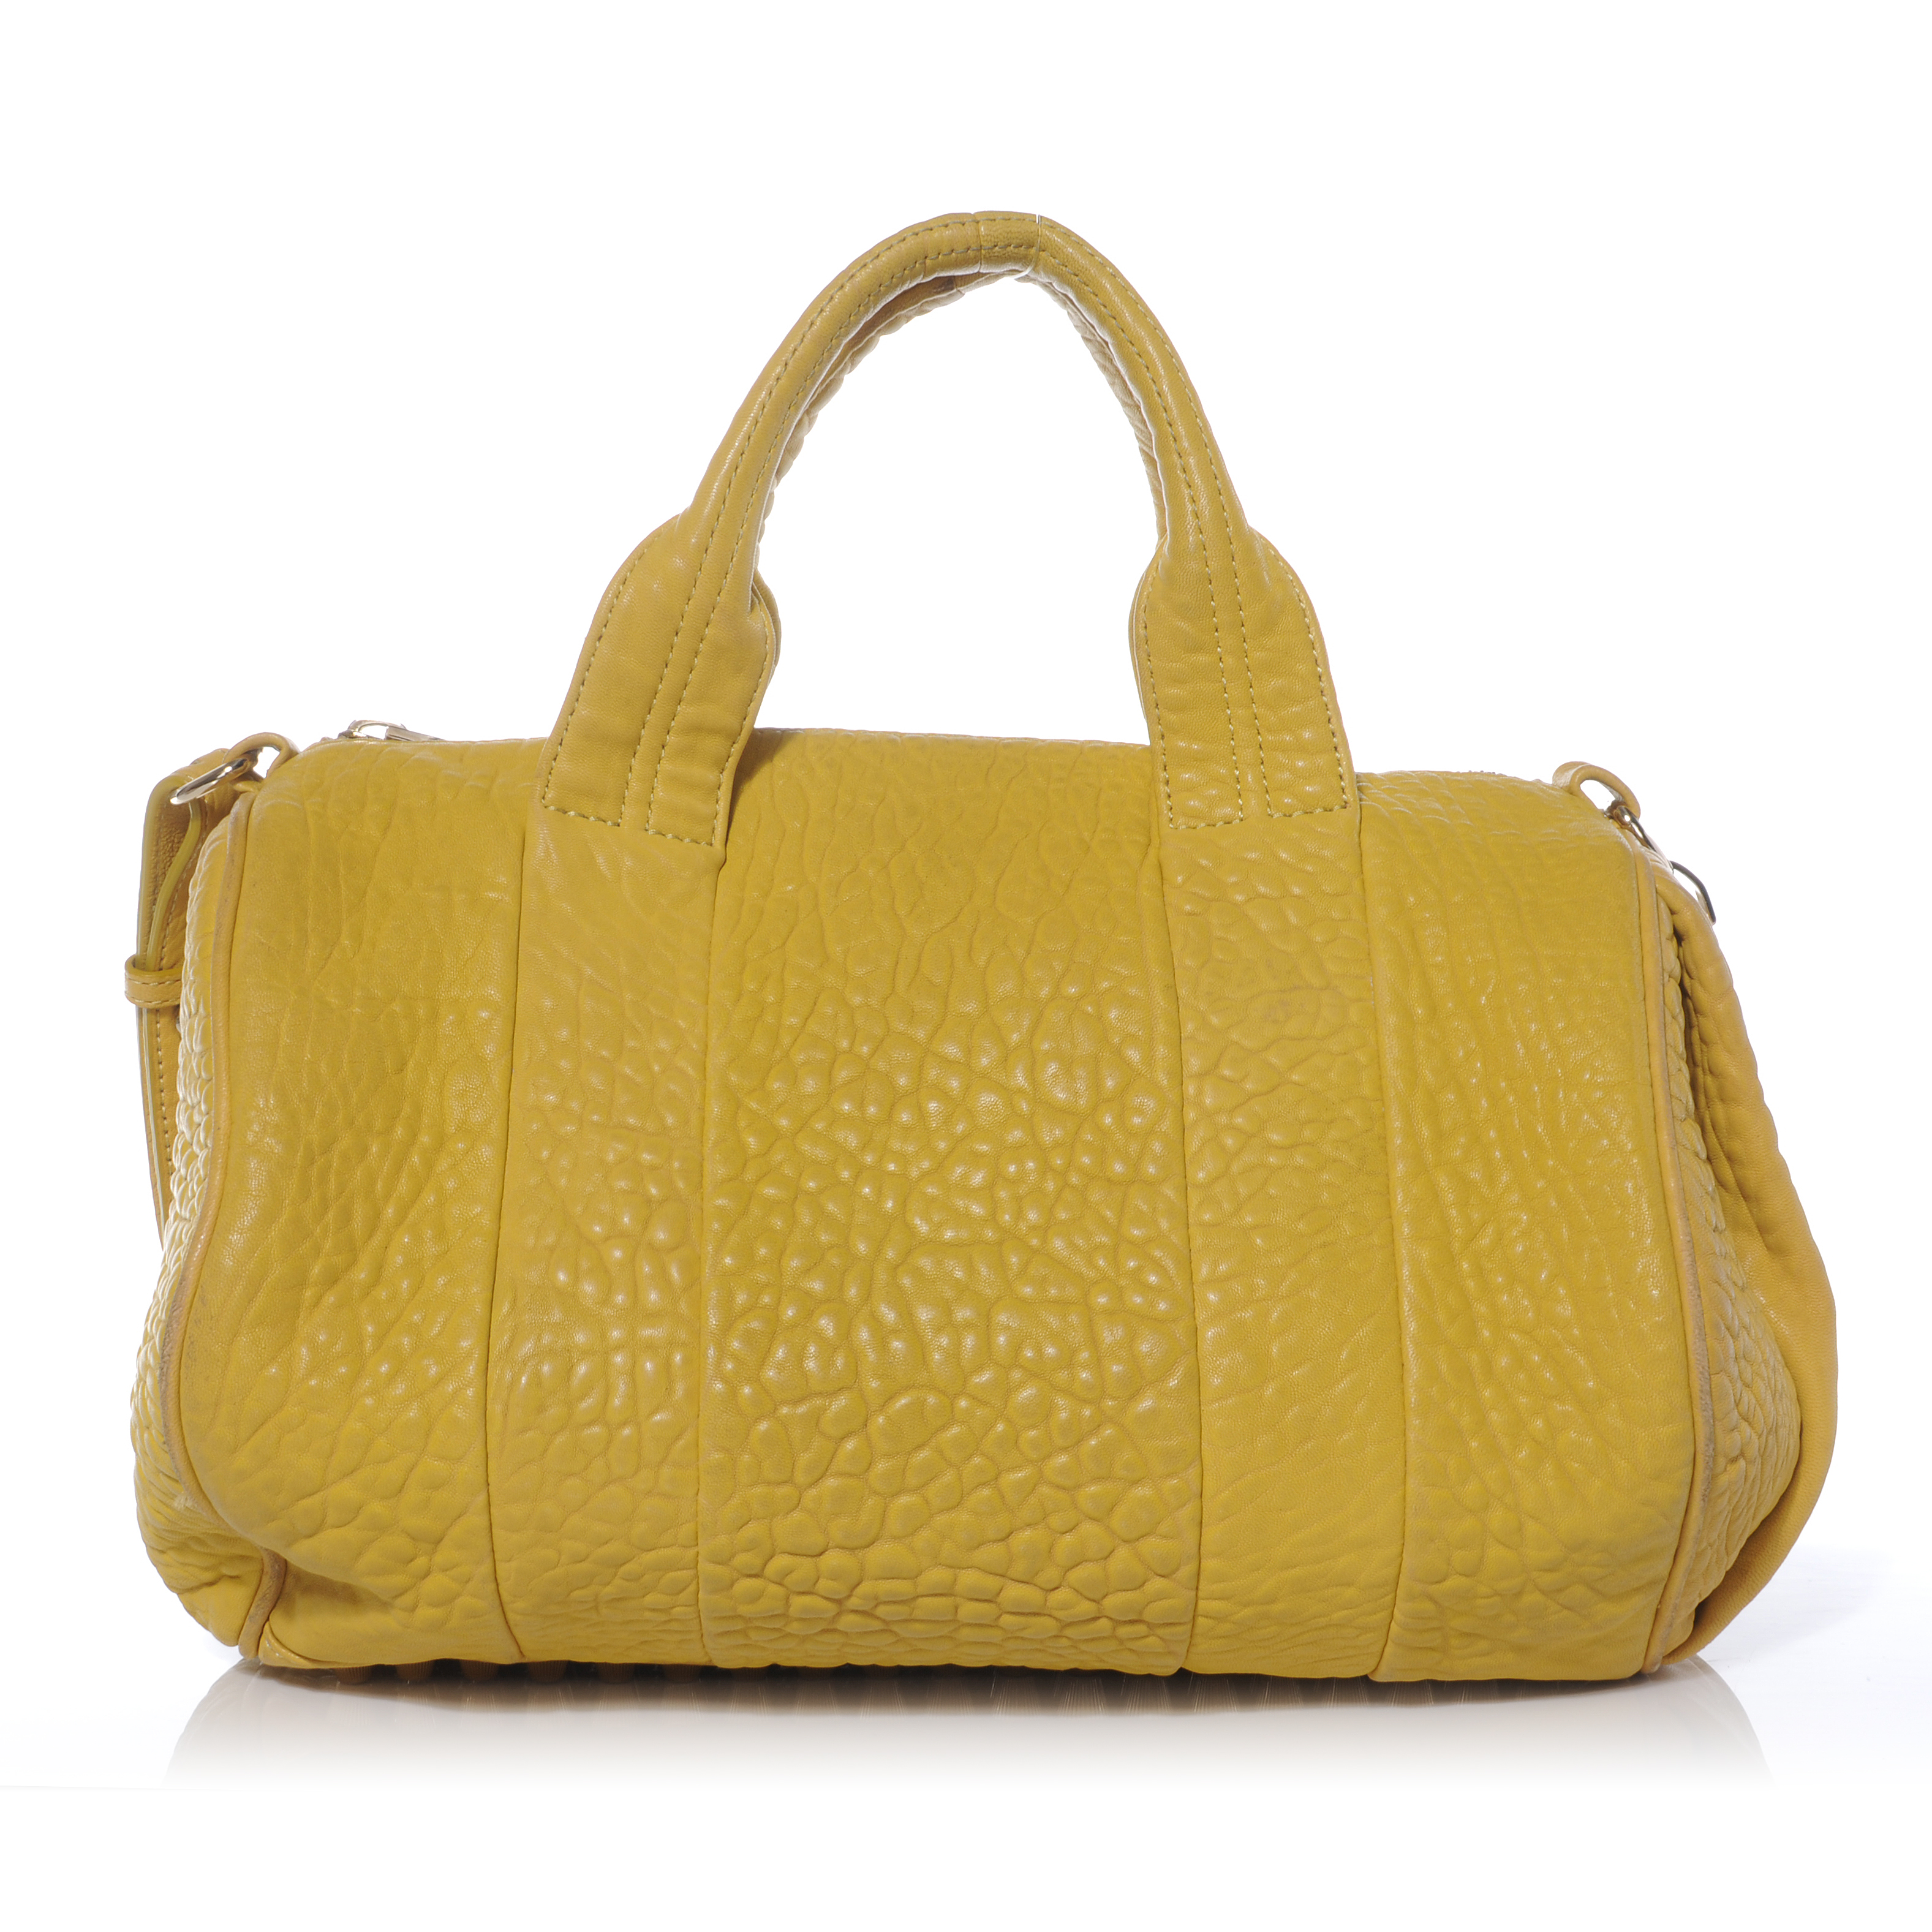 ALEXANDER WANG Leather Rocco Yellow 43191 | FASHIONPHILE